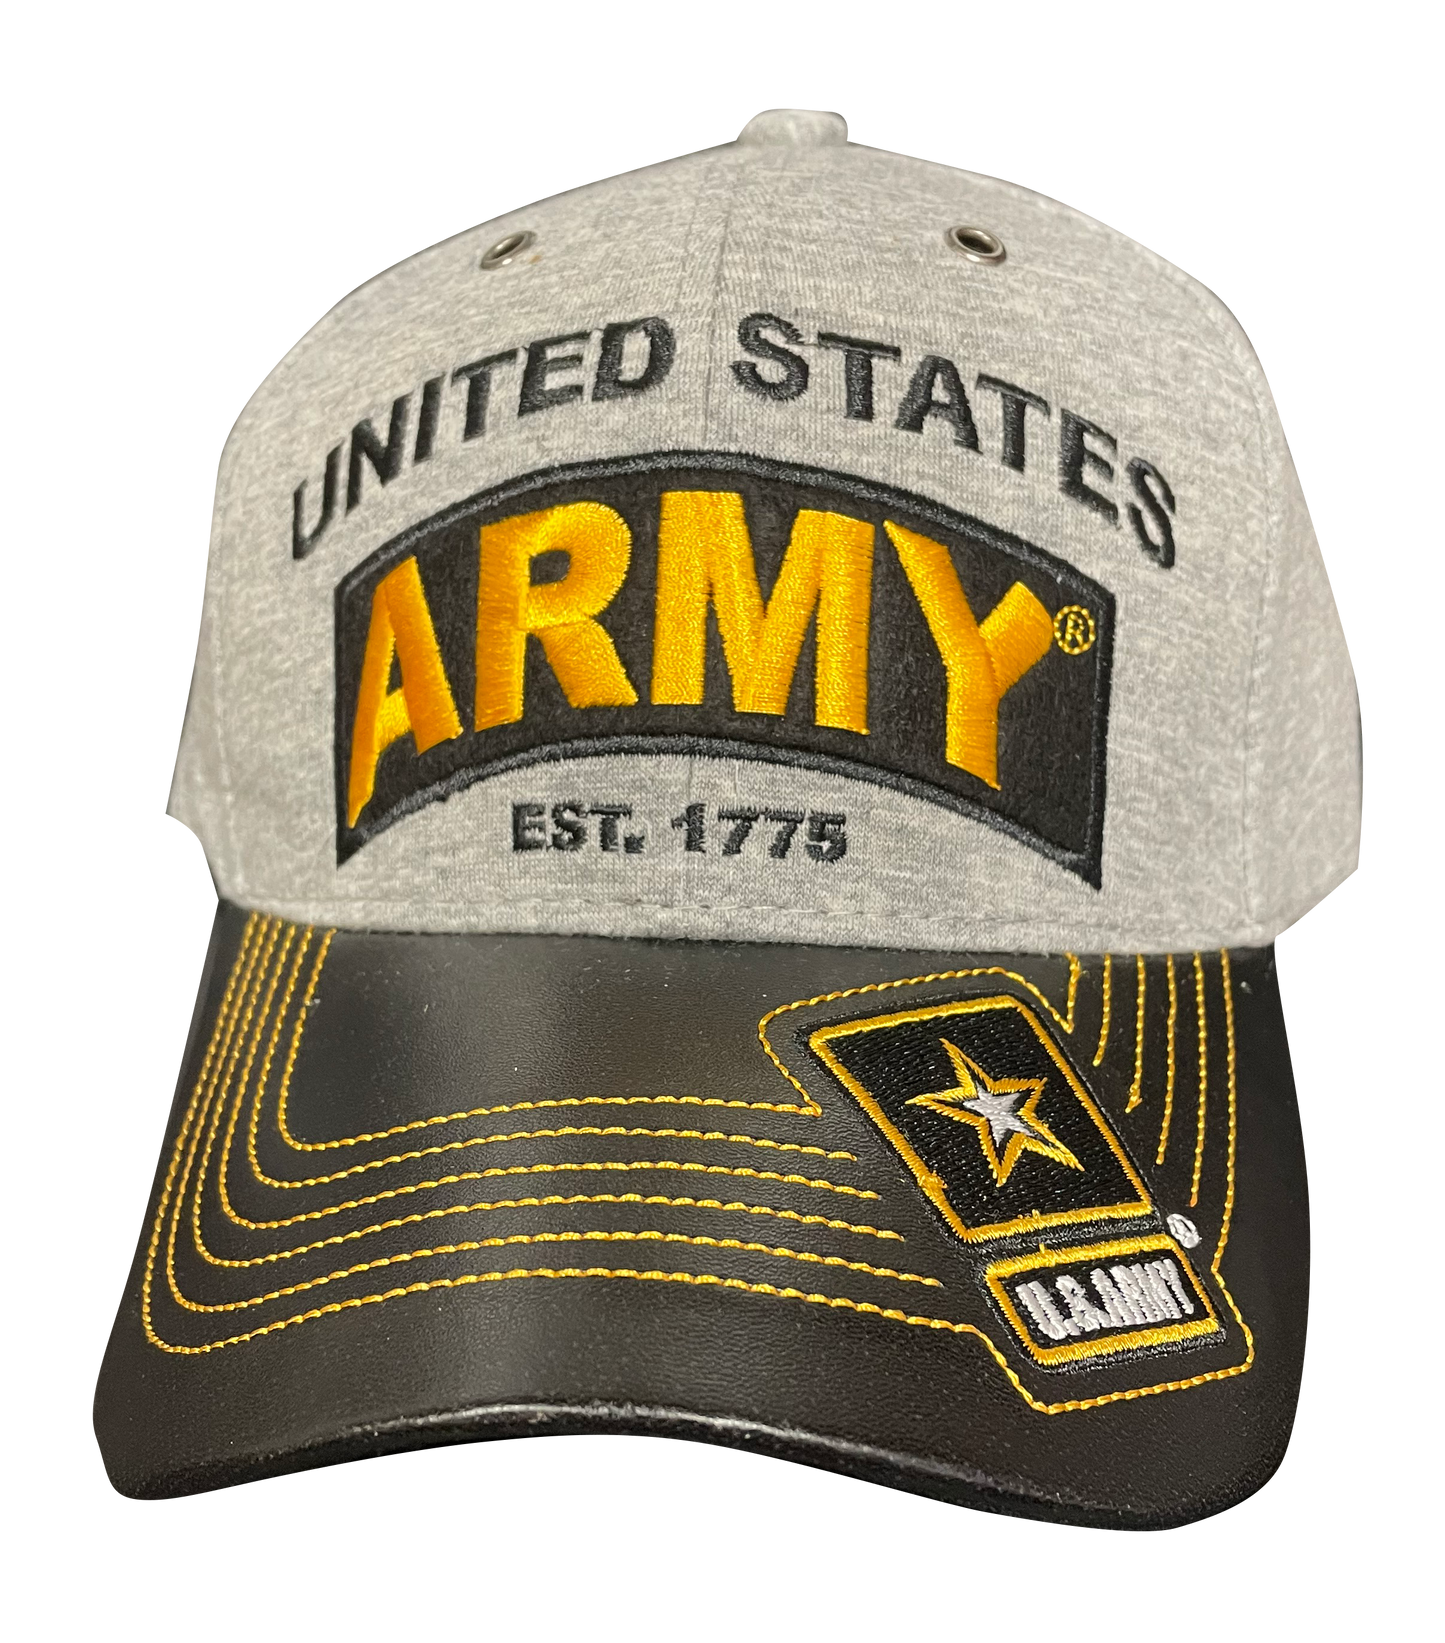 United States Army Jersey Design with Army Star in Multiple Position Embroidery on Ball Cap